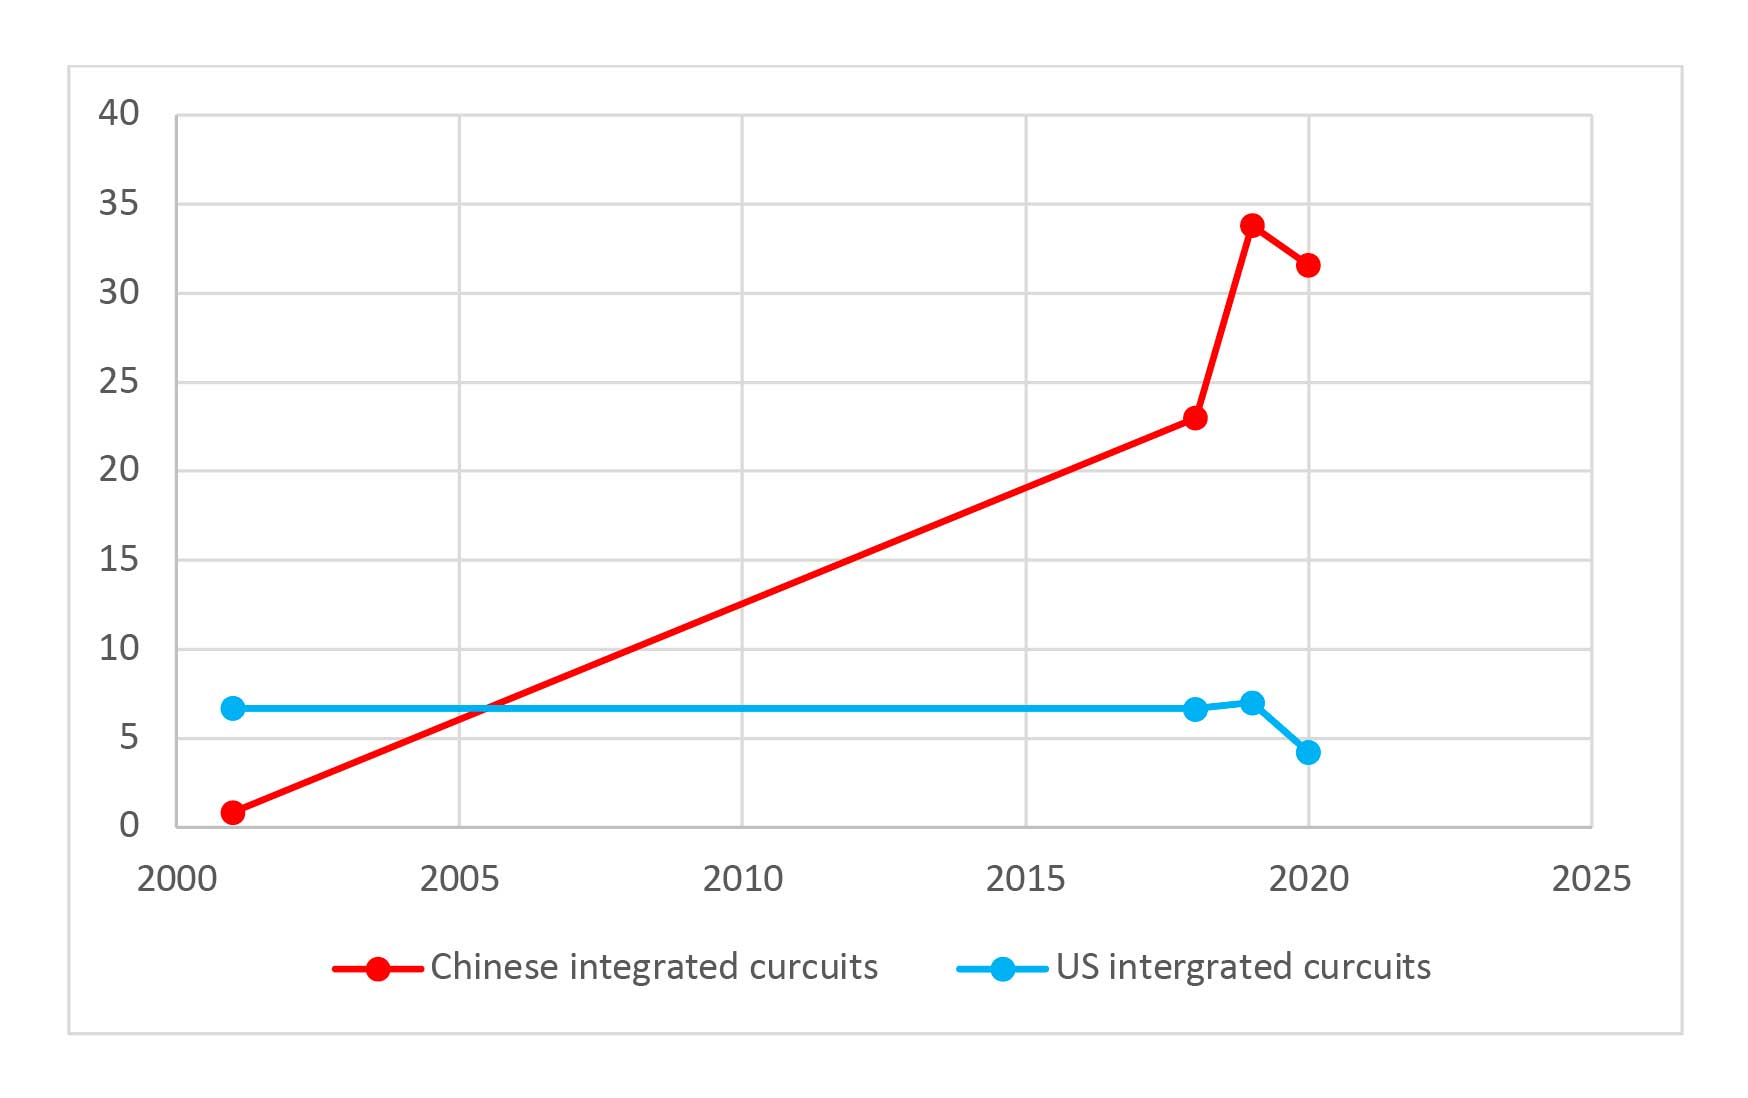 Imports of integrated circuits